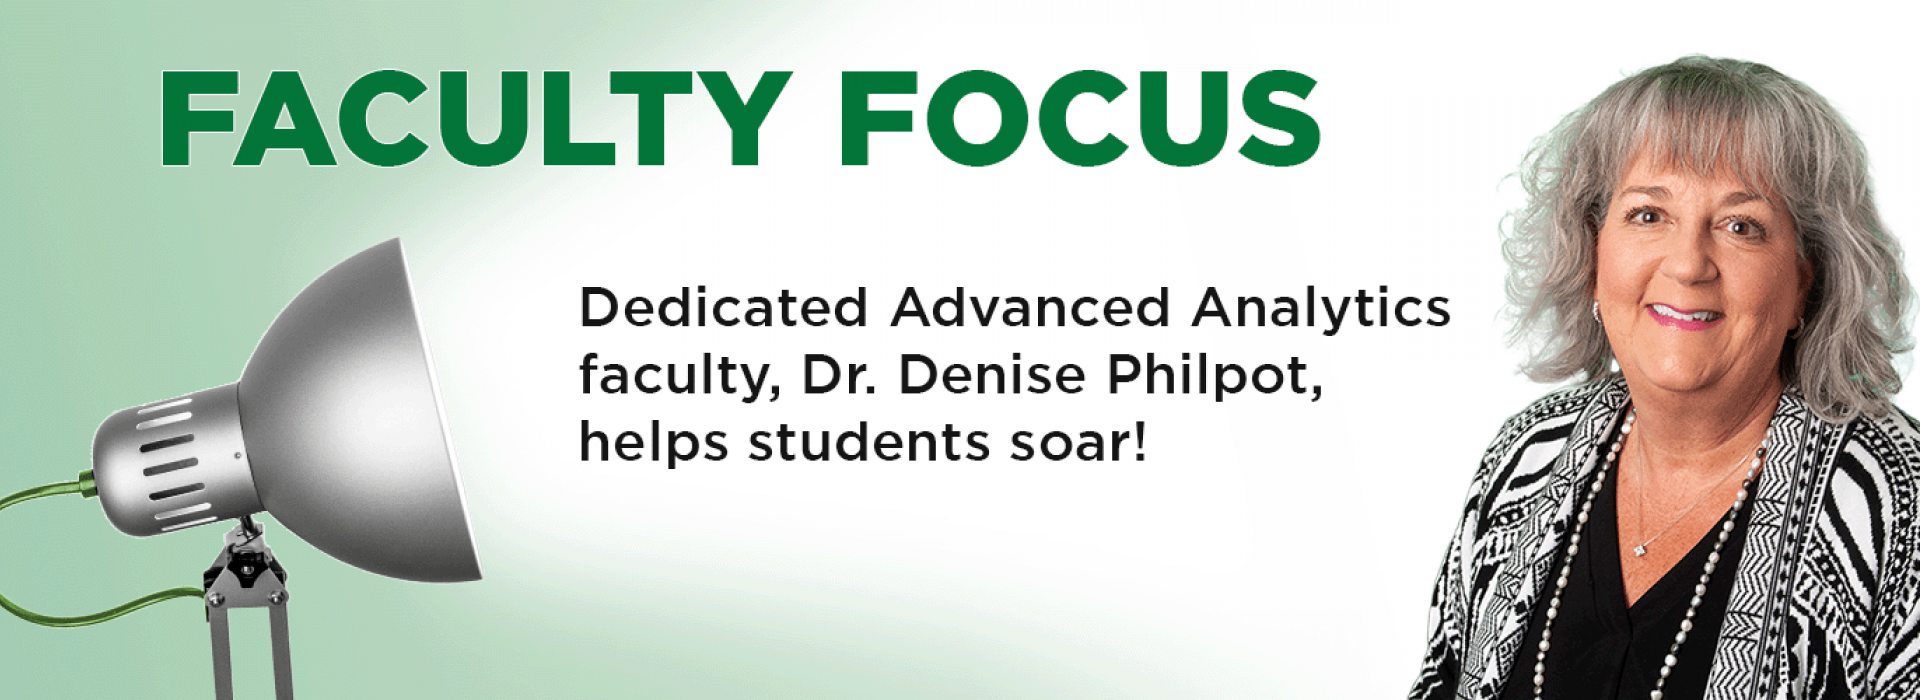 Faculty Focus - Dedicated advanced analytics faculty Dr. Denise Philpot helps students soar!